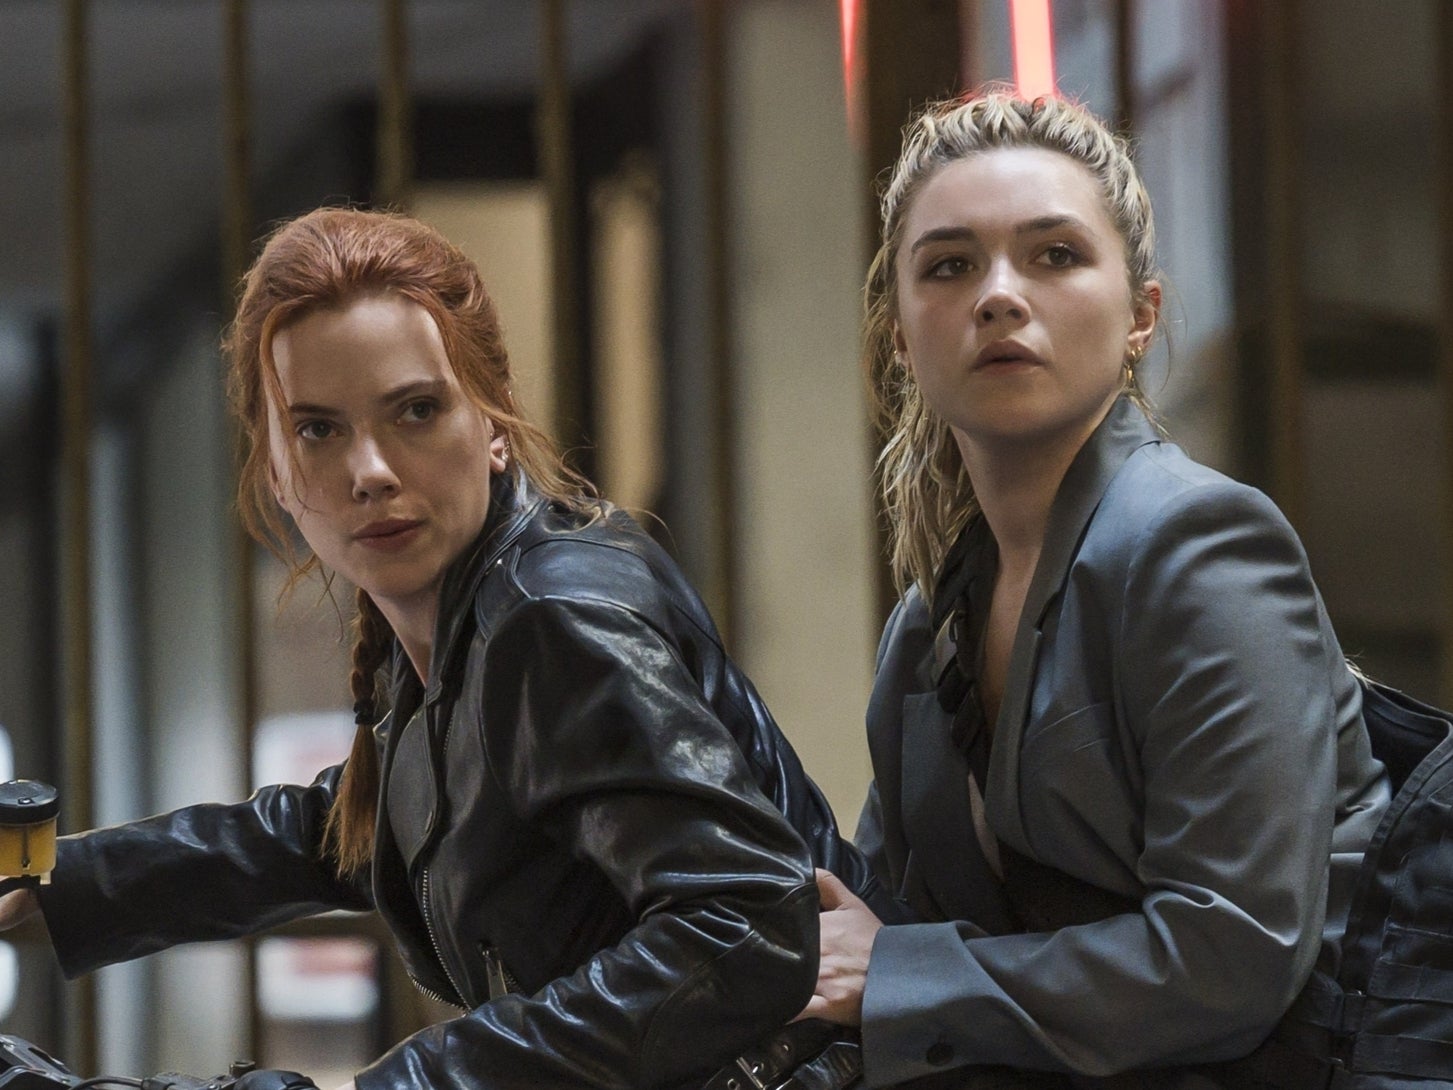 florence pugh excites marvel fans with ‘sneaky’ update as she reprises black widow role in new film